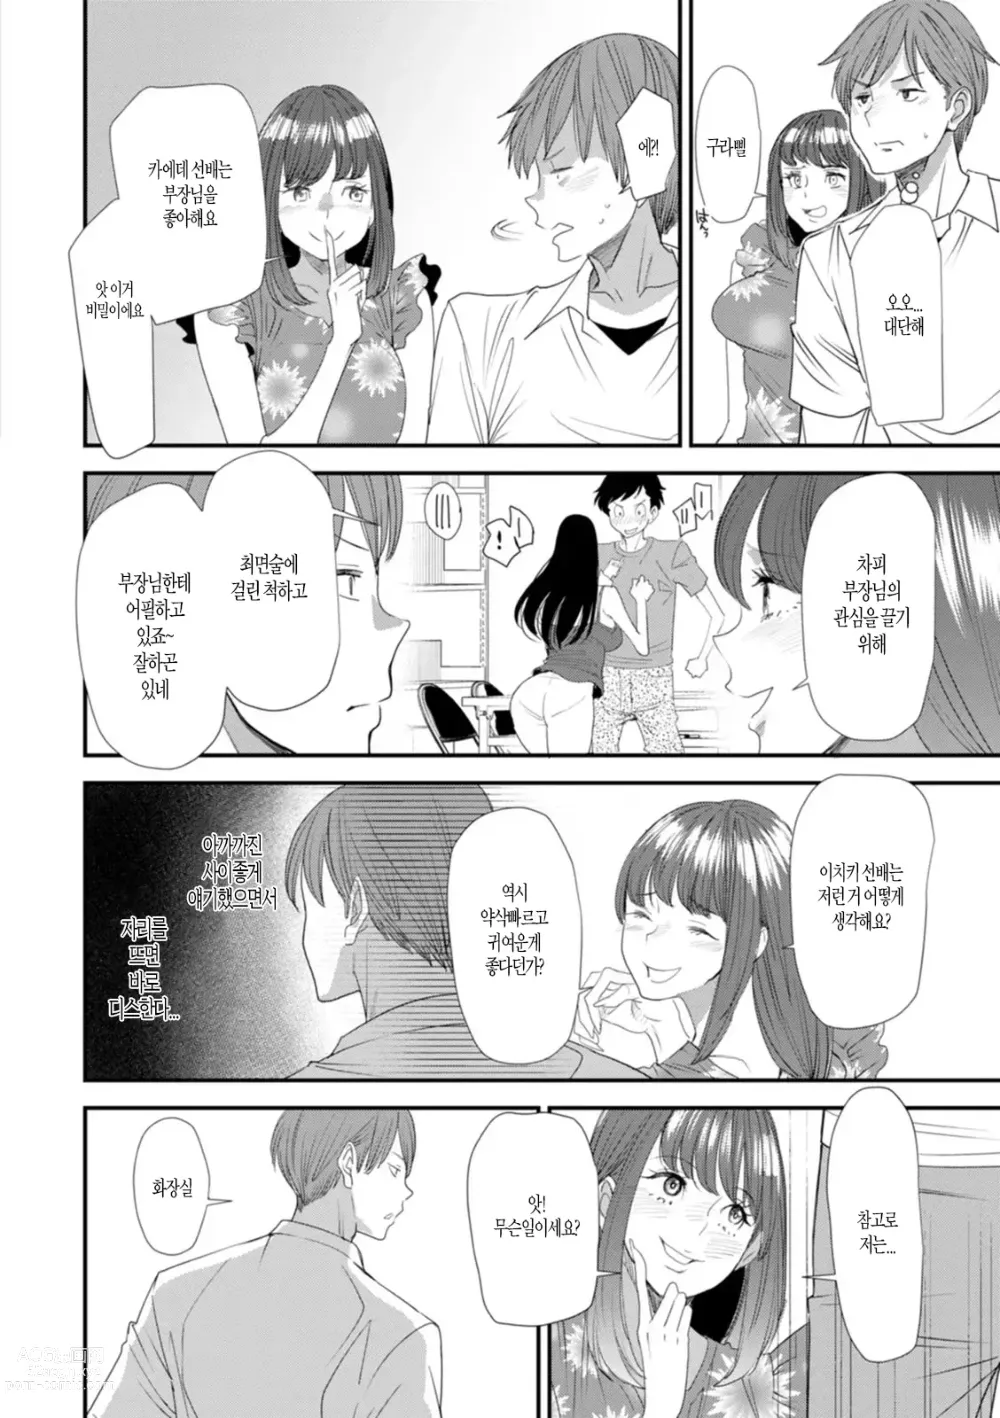 Page 26 of manga Inma Joshi Daisei no Yuuutsu Ch. 1-3  The Melancholy of the Succubus who is a college student 음마 여대생의 우울